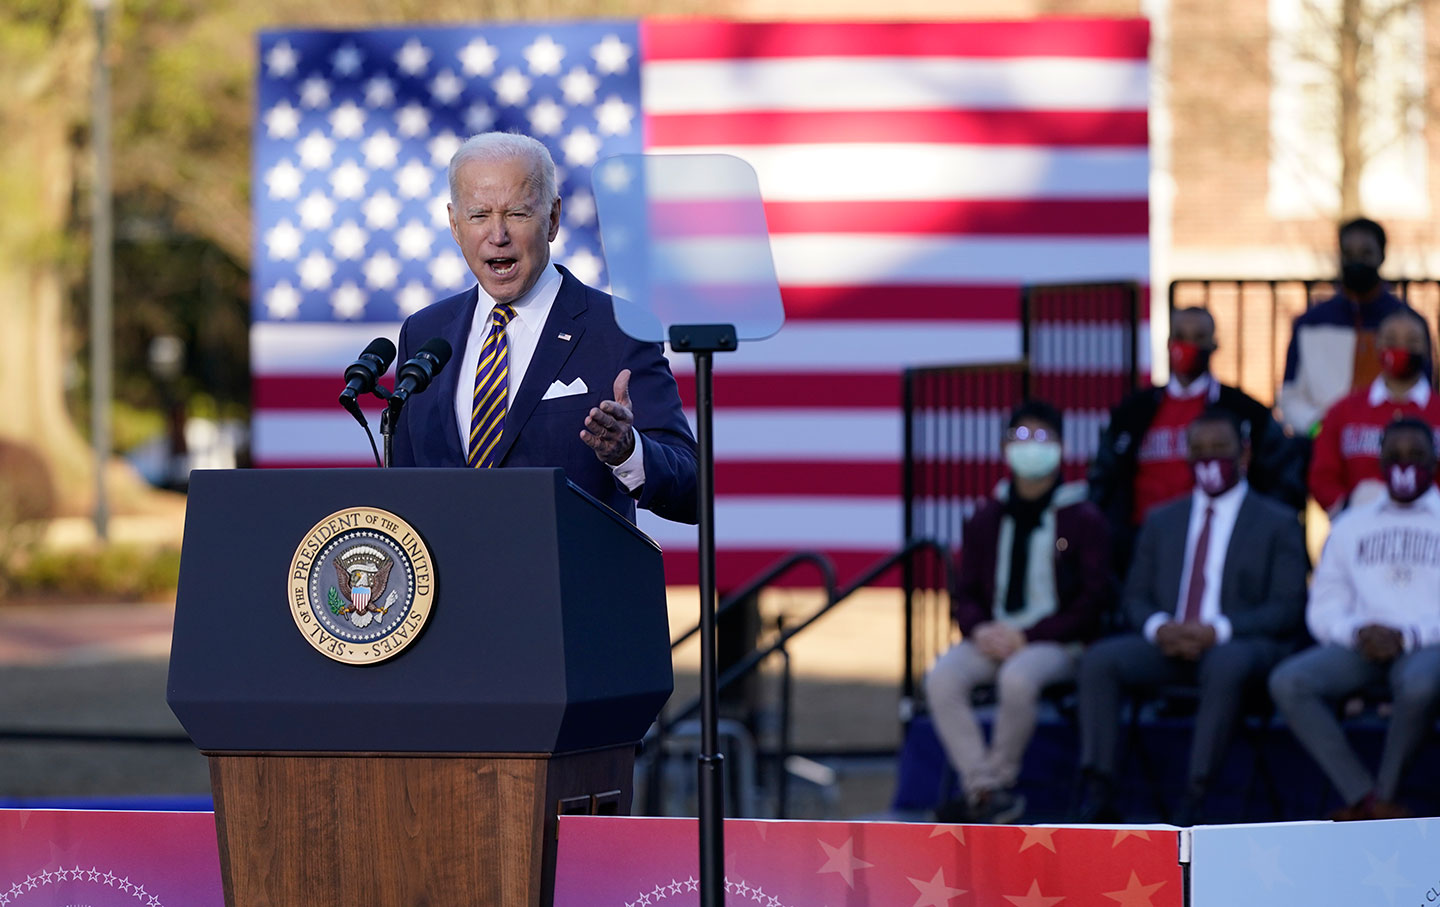 Joe Biden Delivers the Speech, and the Fire, on Voting Rights He Should Have Brought Last July